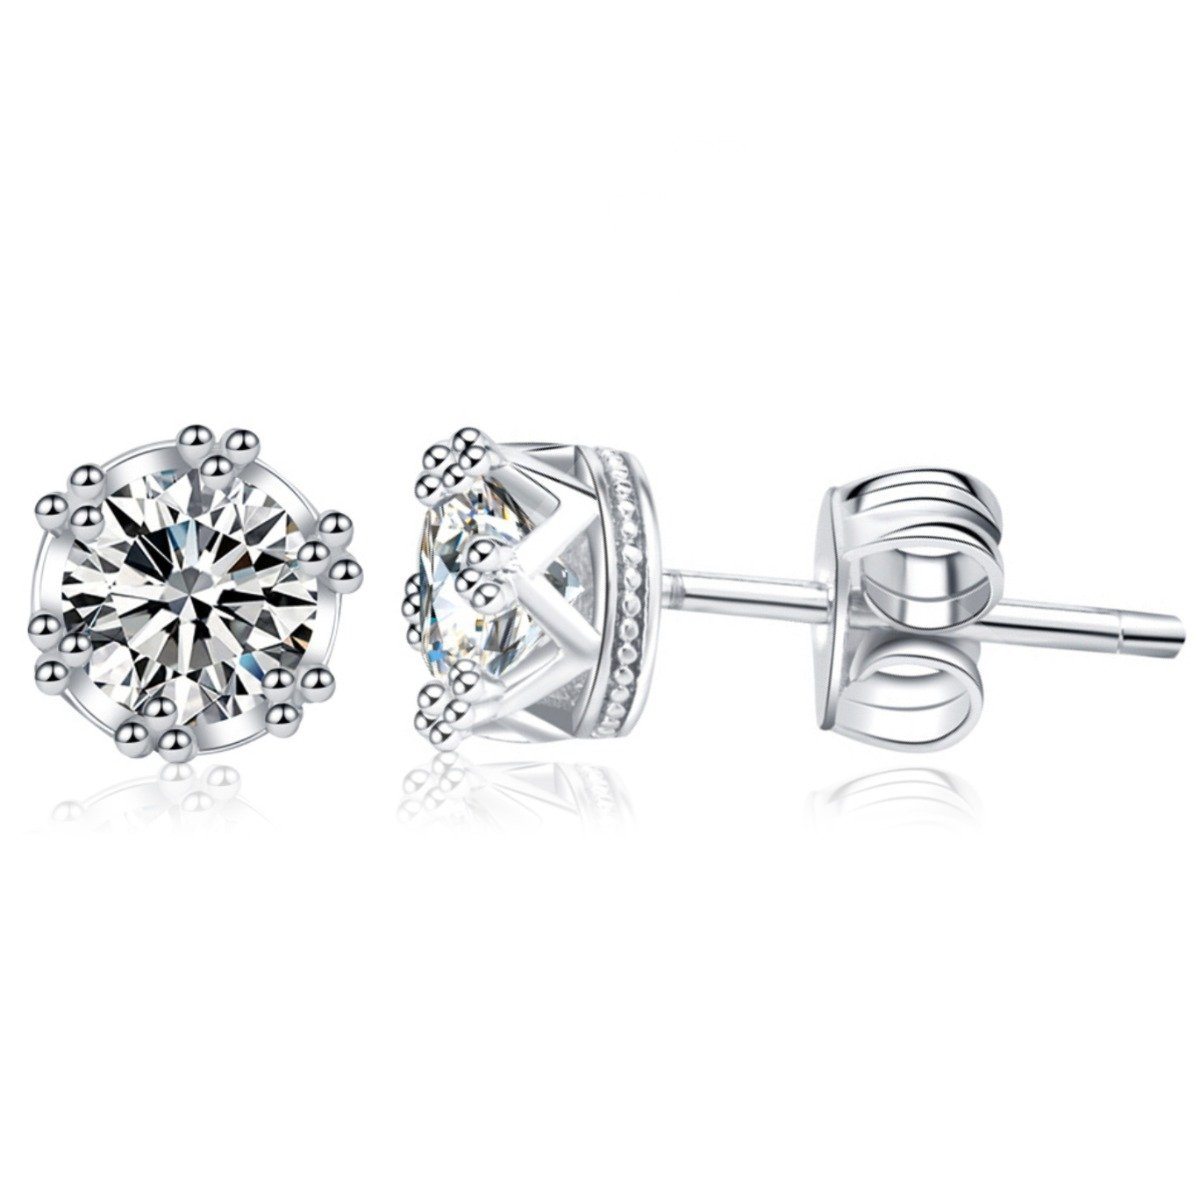 Crown Designed Stud Earring with Cubic Zirconia Stones